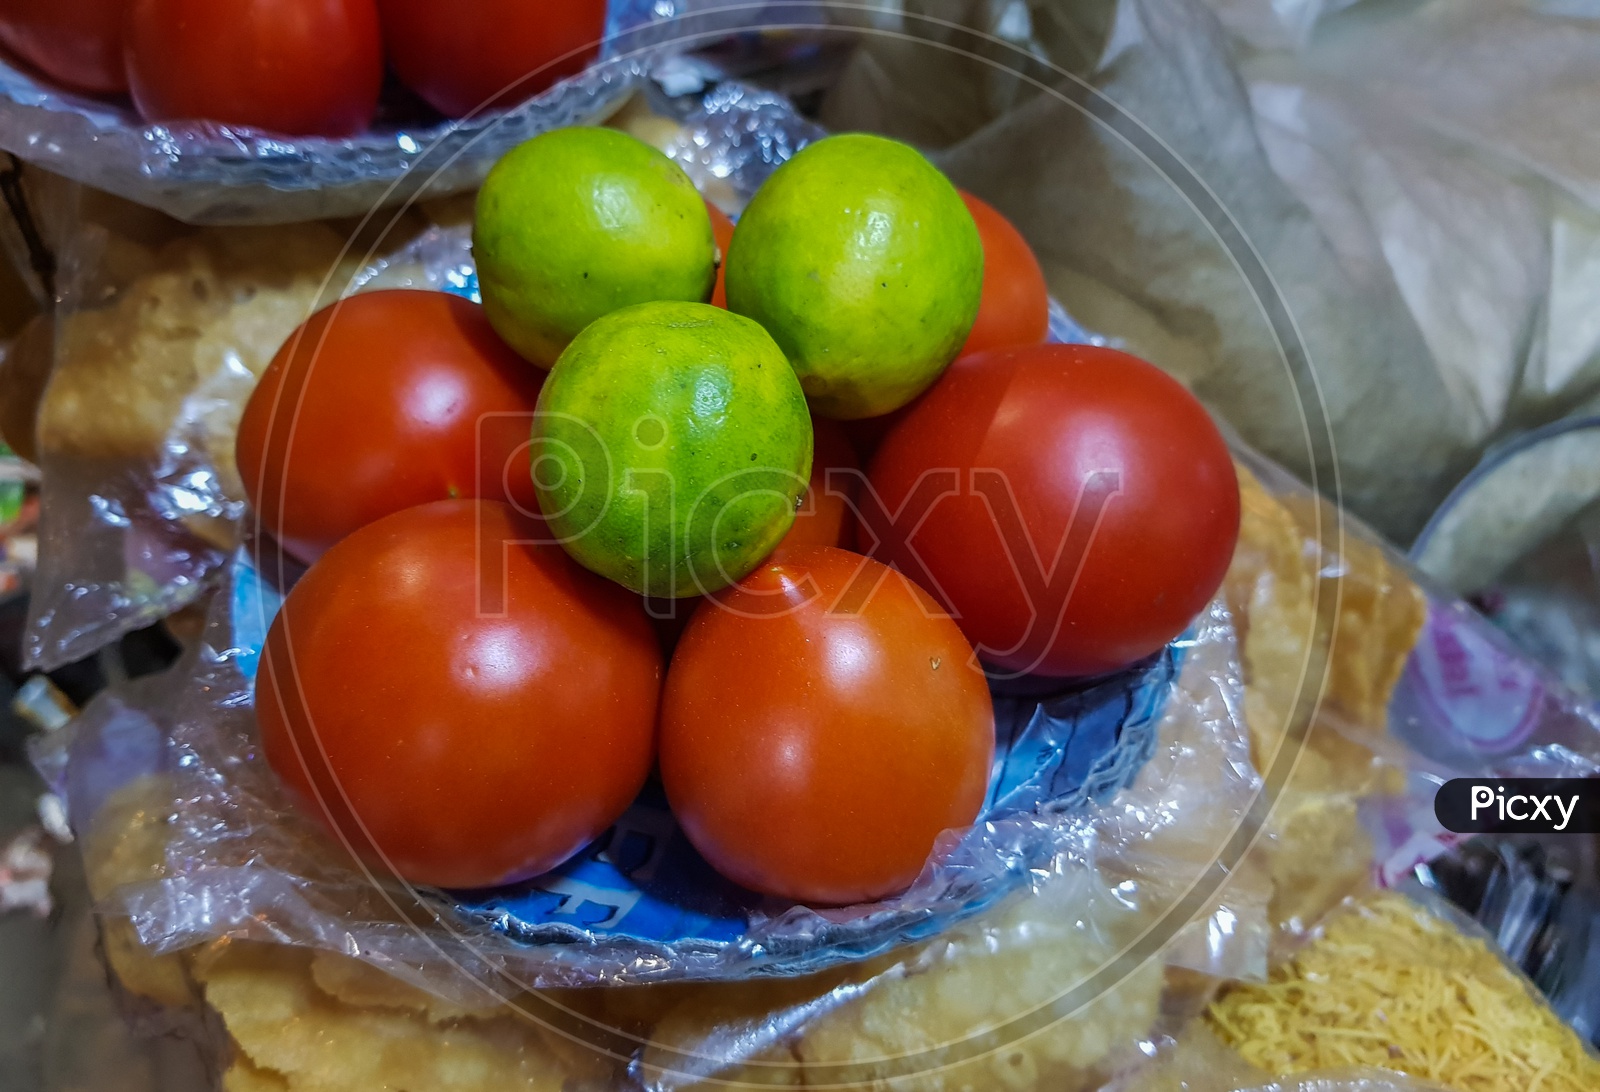 Lemon And Tomato On A Plate In A Chaat Shop